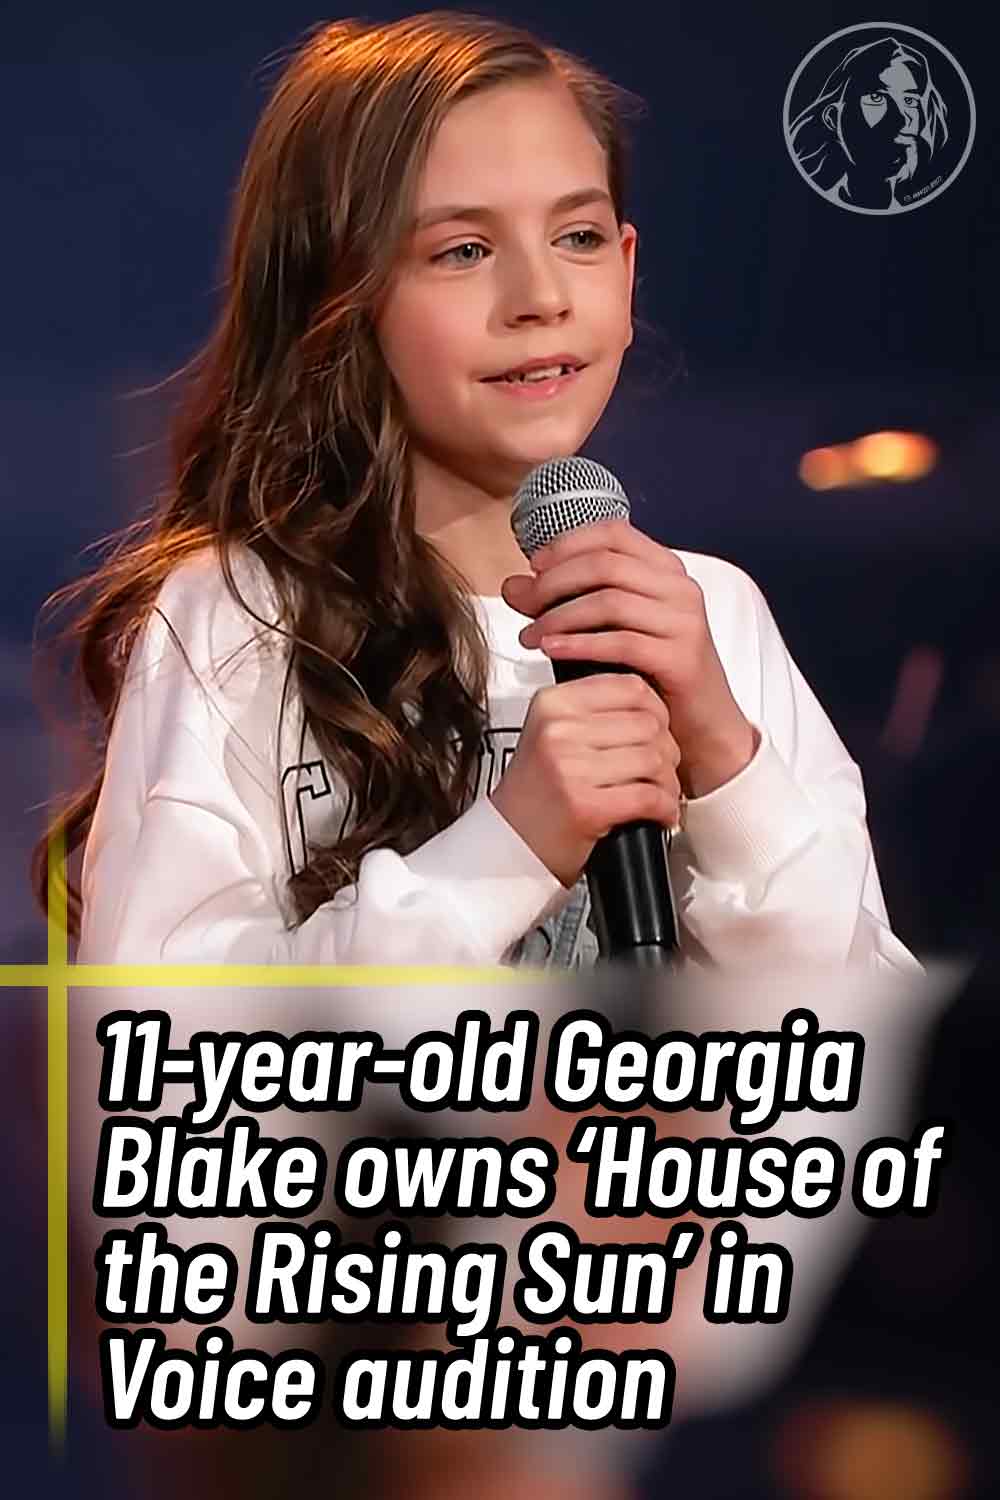 11-year-old Georgia Blake owns ‘House of the Rising Sun’ in Voice audition